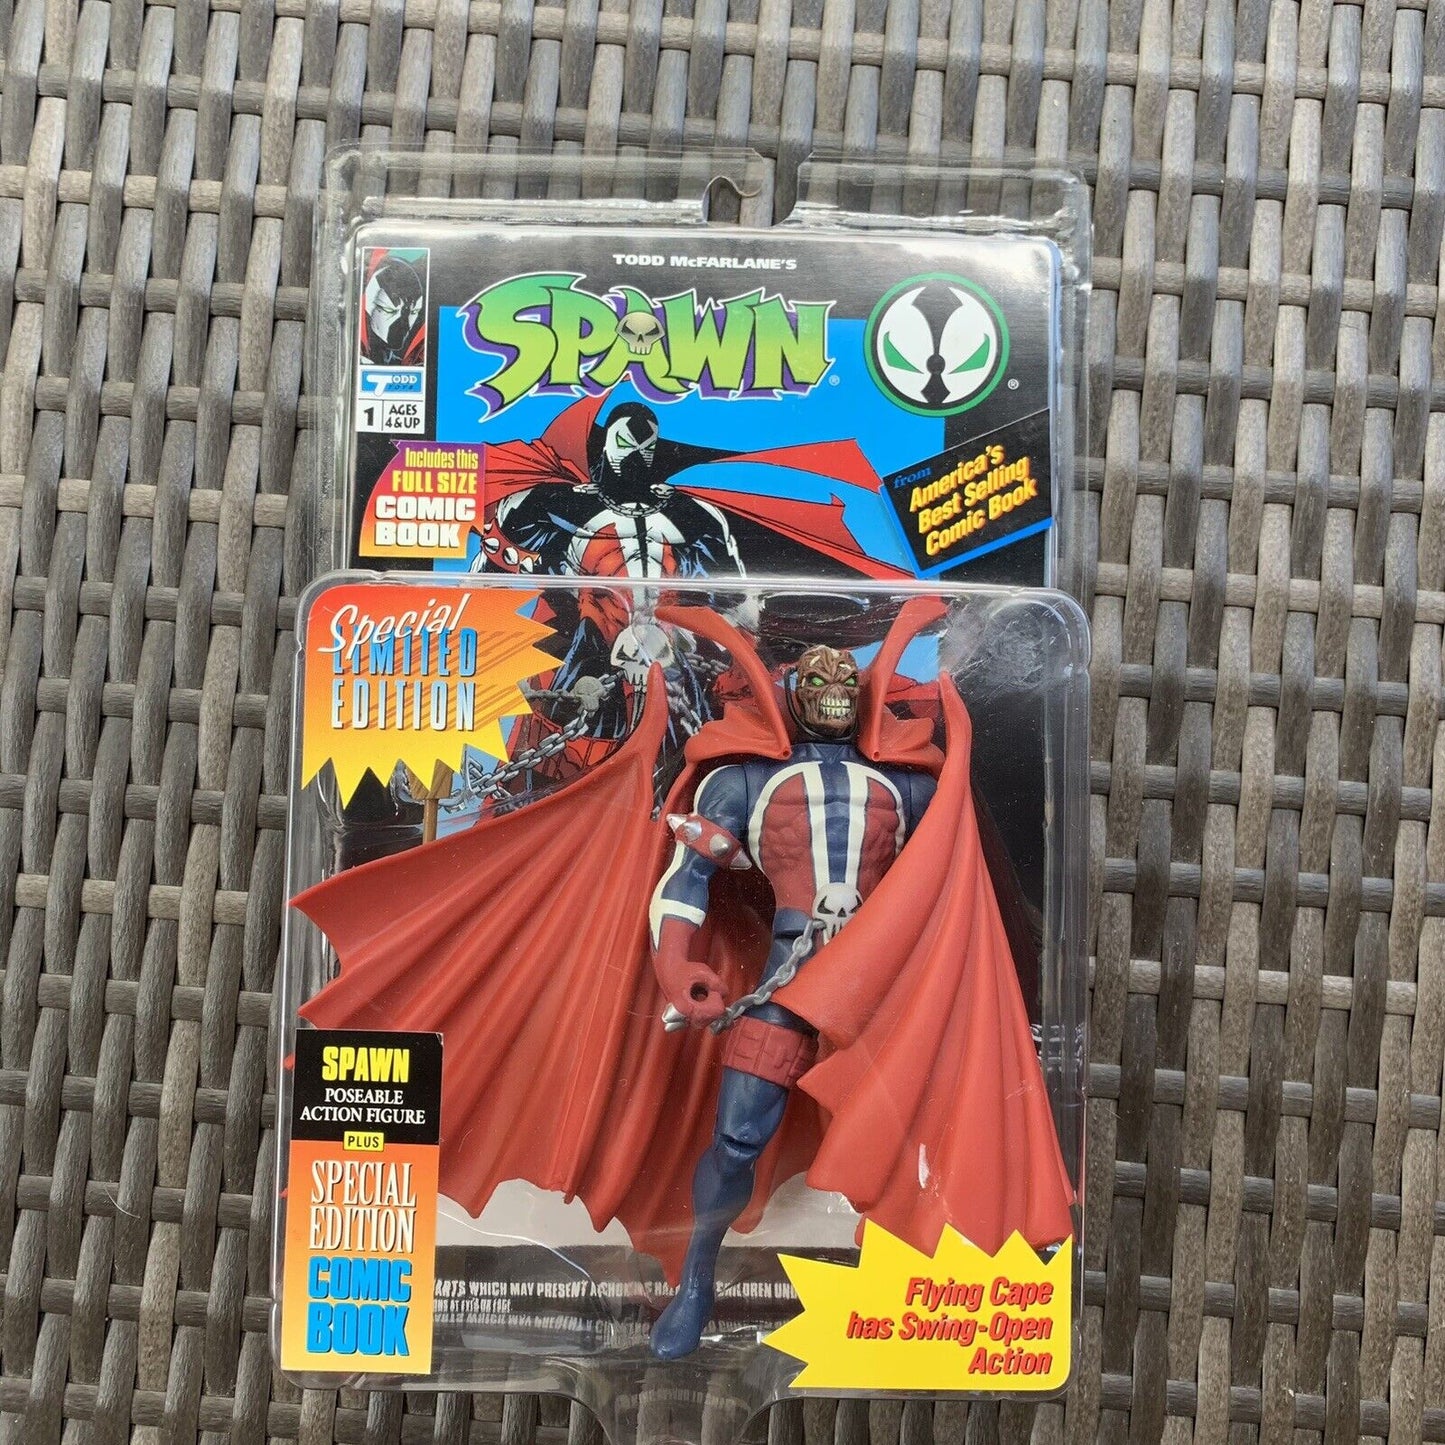 1994 SPAWN WORM HEAD BLUE SUIT VARIANT FLYING CAPE WITH FULL SIZE COMIC BOOK